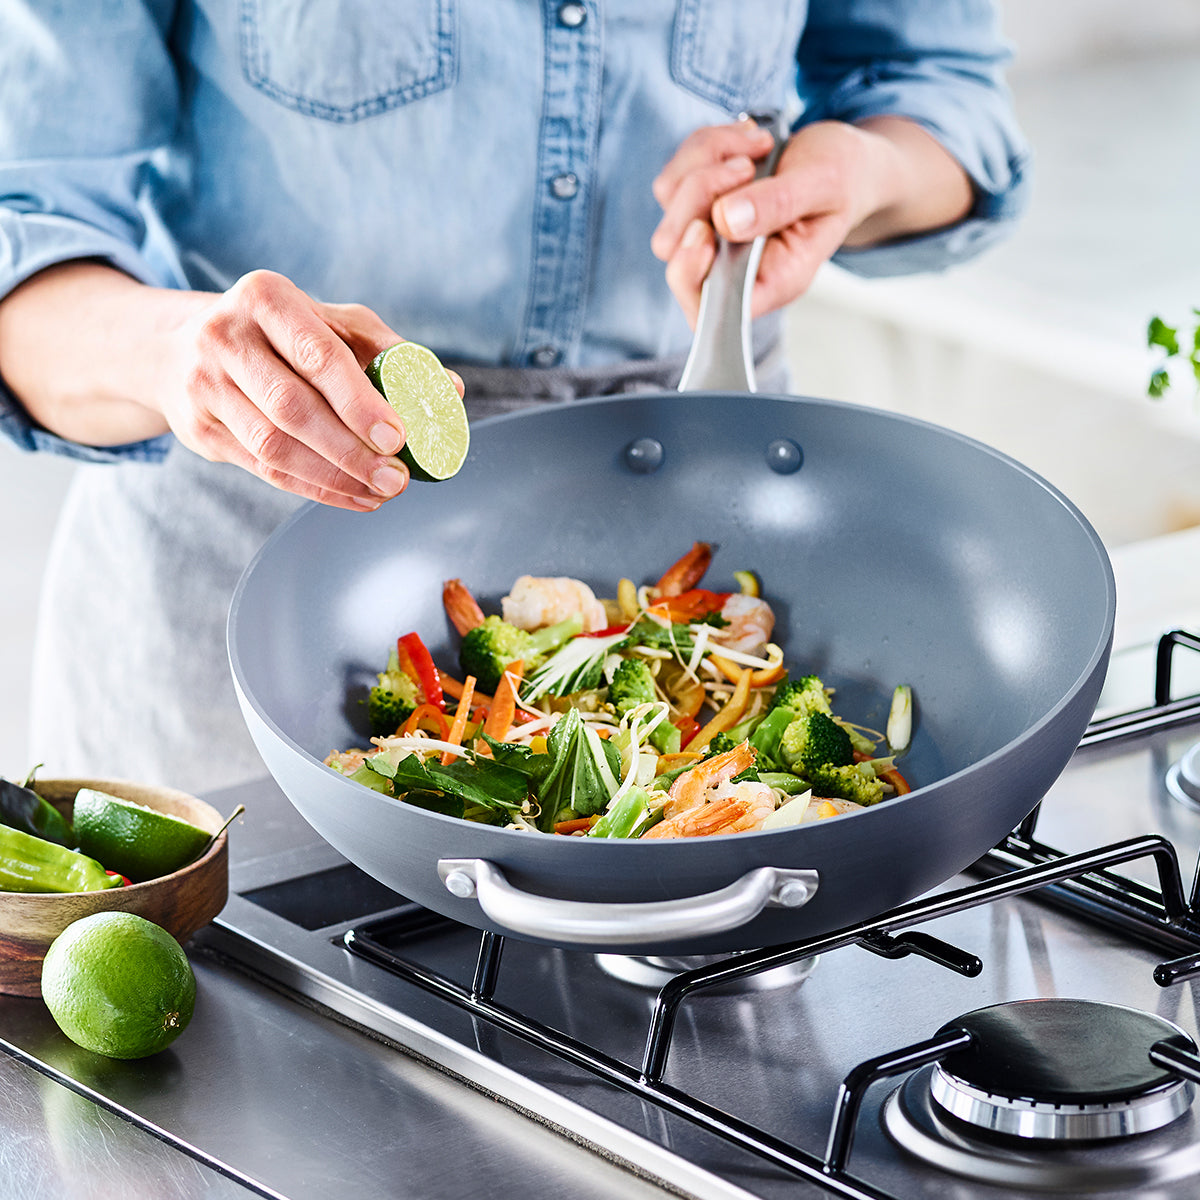 GreenPan Lima Ceramic Nonstick Cookware Review: For New Cooks